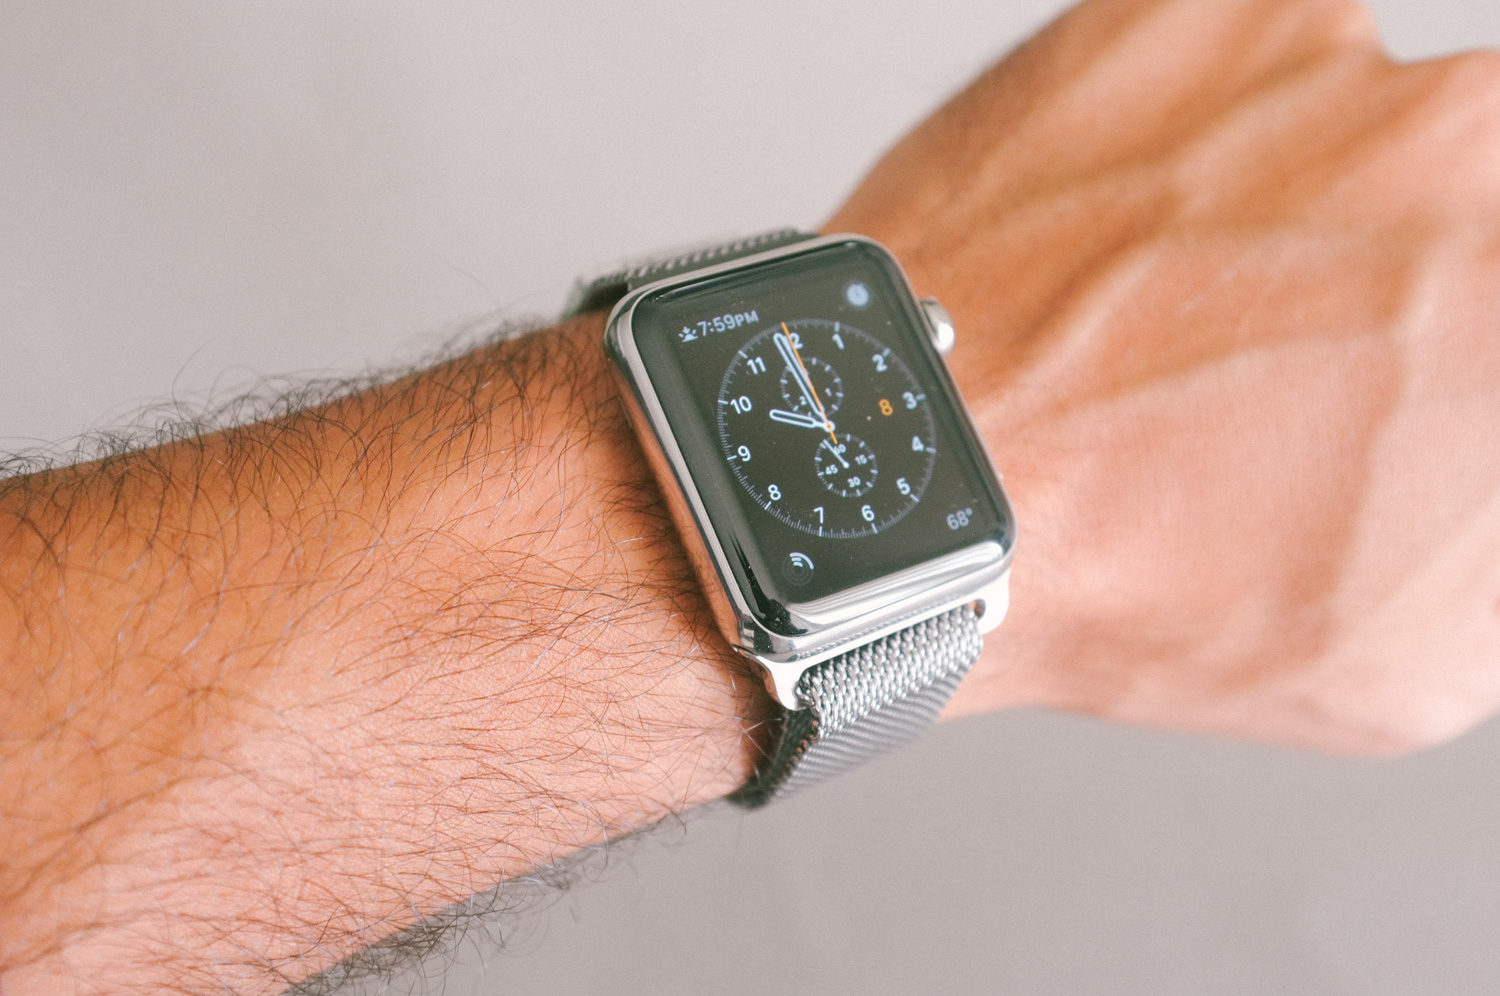 5 Small Ways The Apple Watch Has Become The Only Watch I Want To Wear